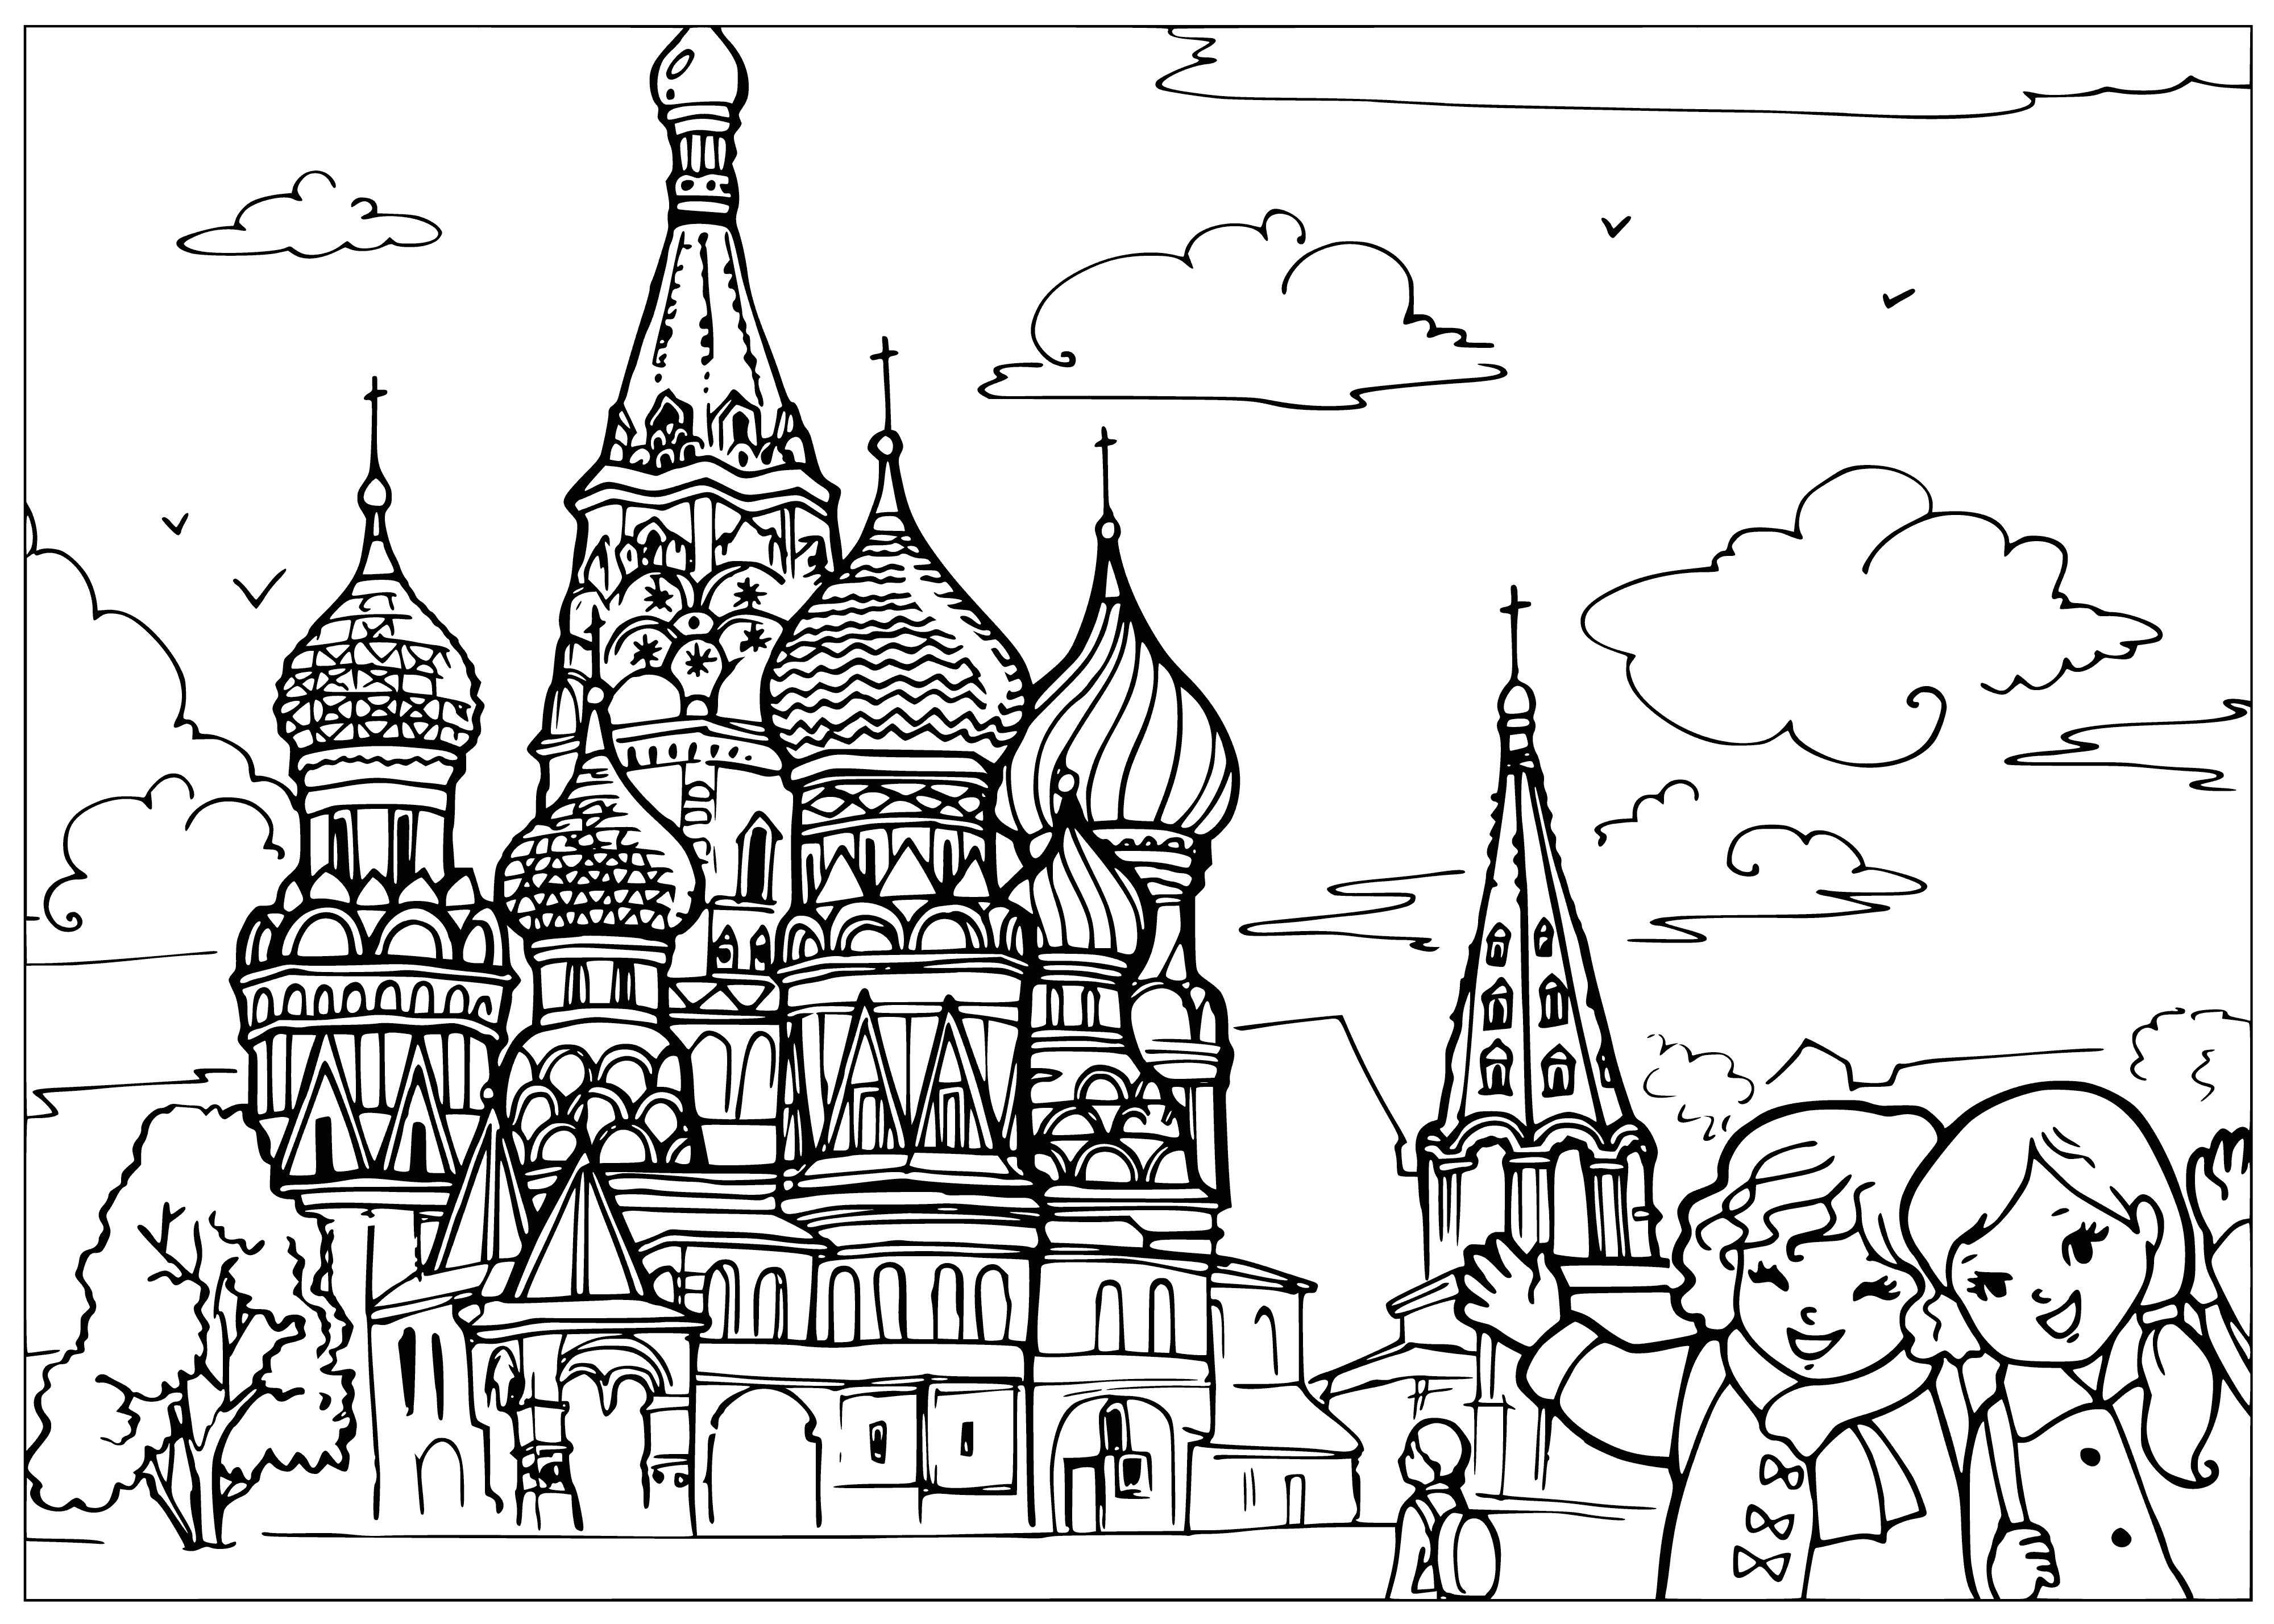 St. Basil's Cathedral in Moskou, Rusland inkleurbladsy